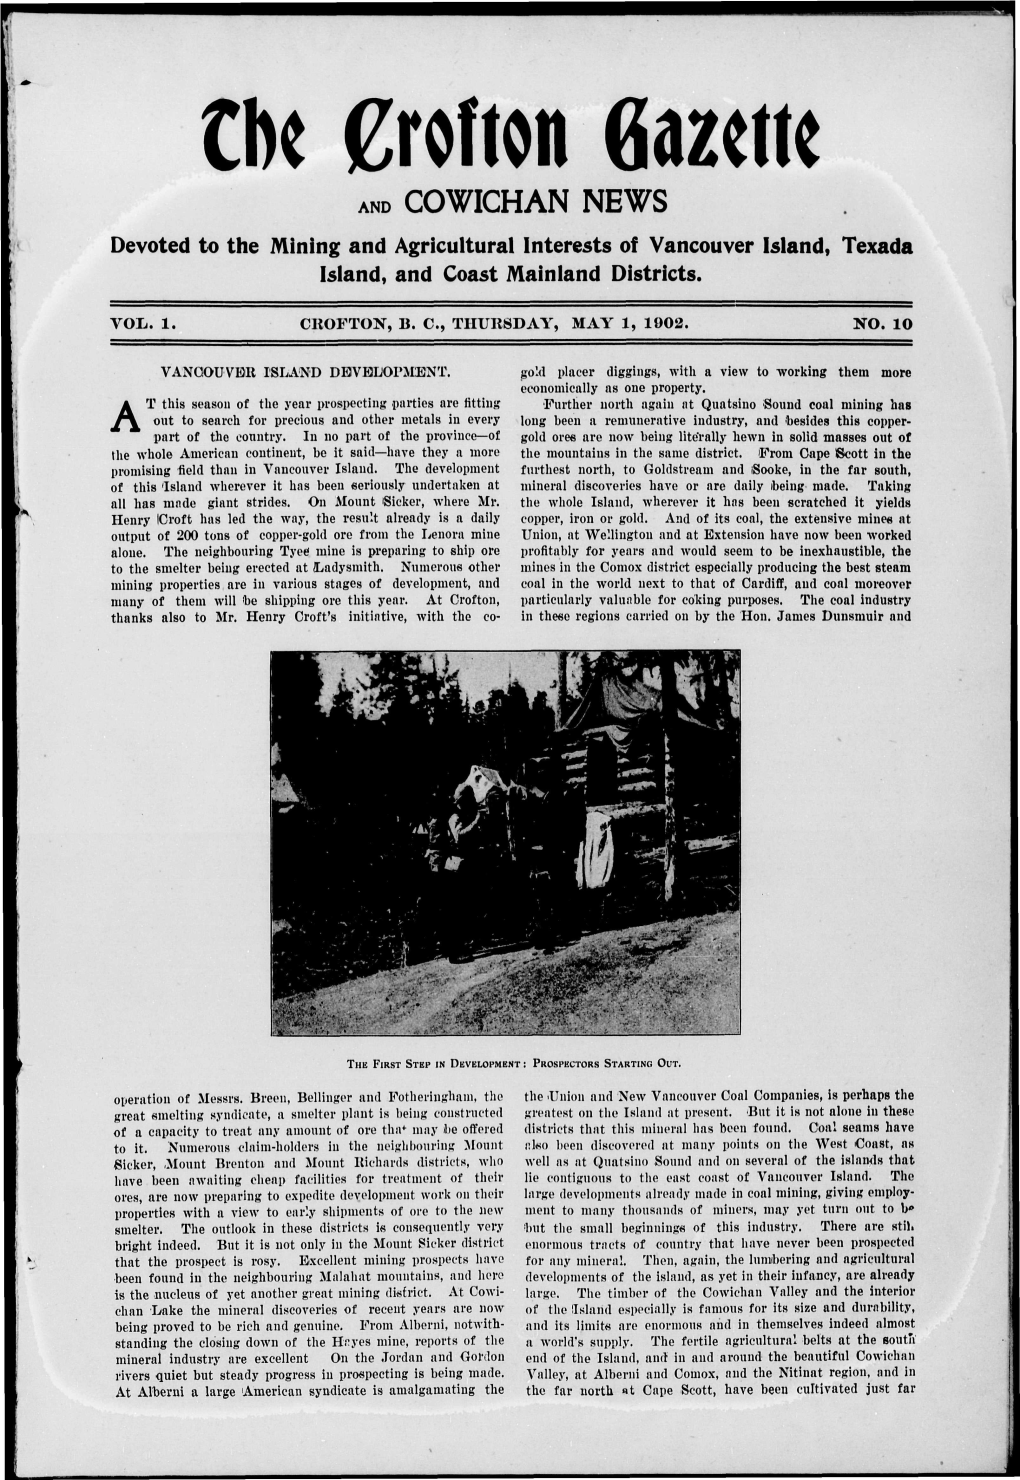 AND COWICHAN NEWS Devoted to the Mining and Agricultural Interests of Vancouver Island, Texada Island, and Coast Mainland Districts